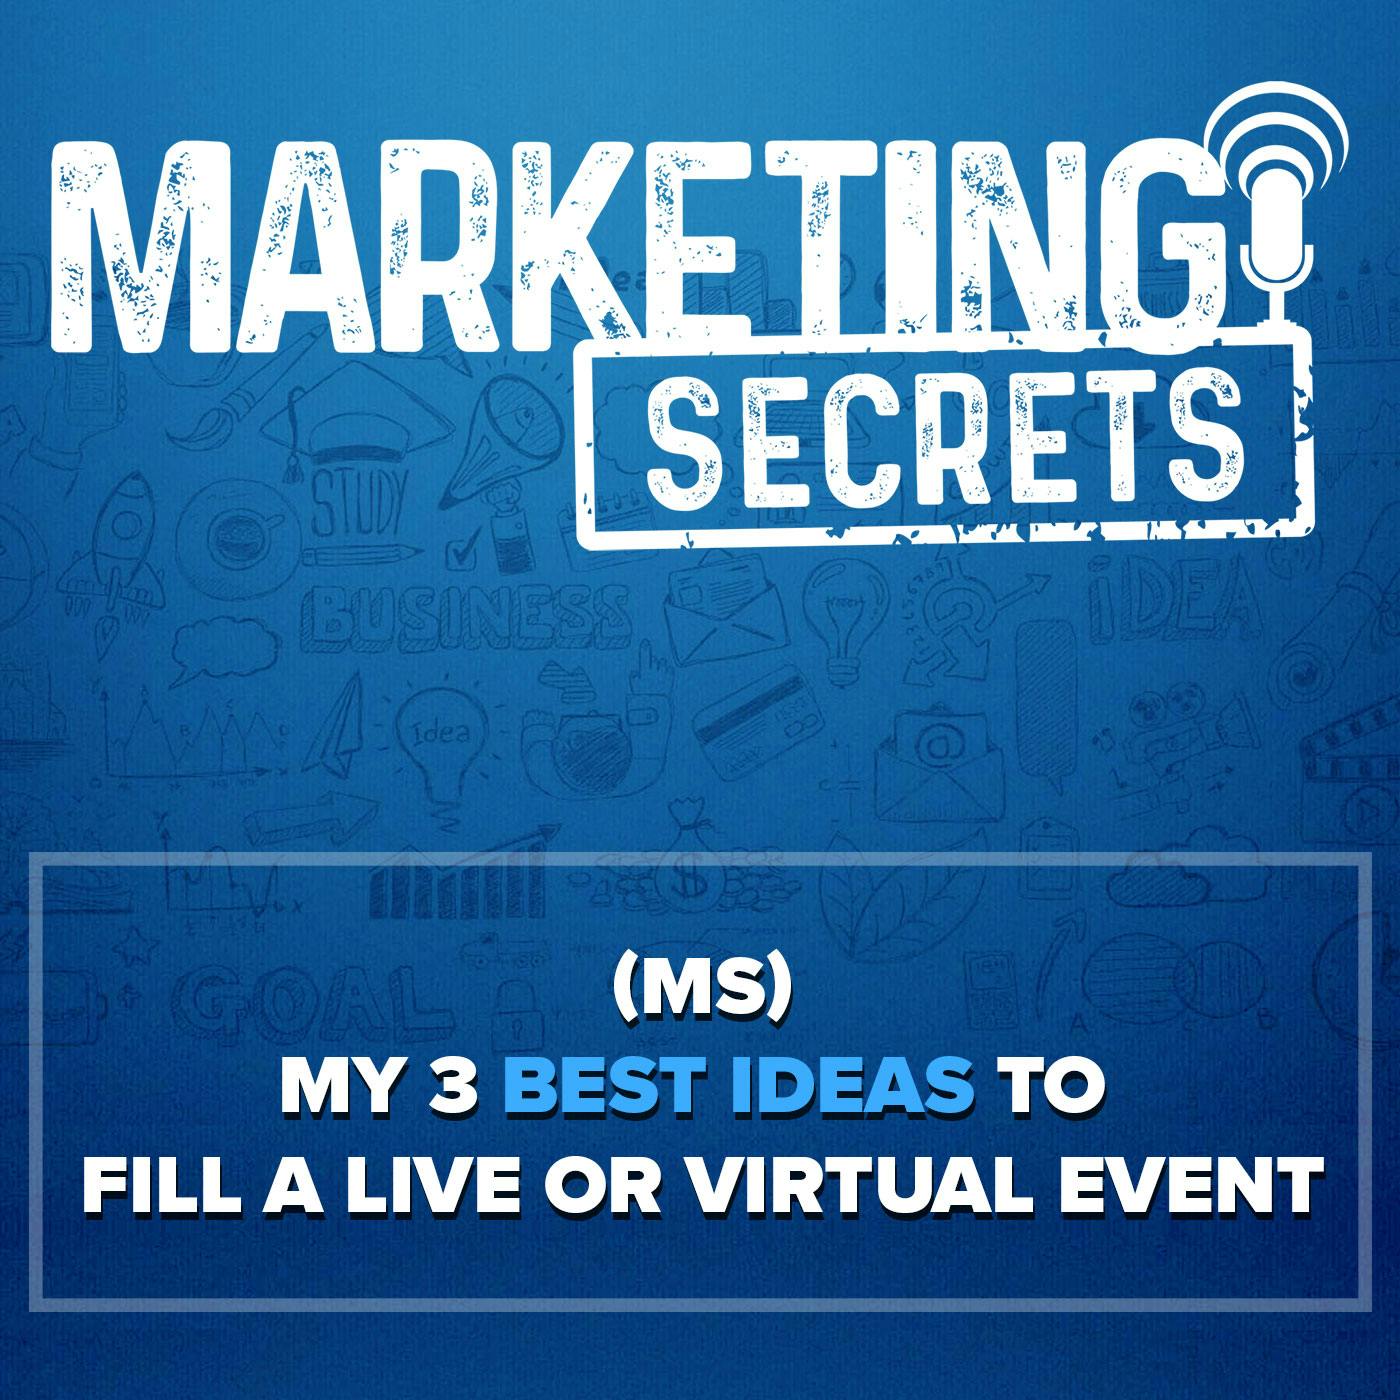 (MS) My 3 Best Ideas to Fill a Live or Virtual Event